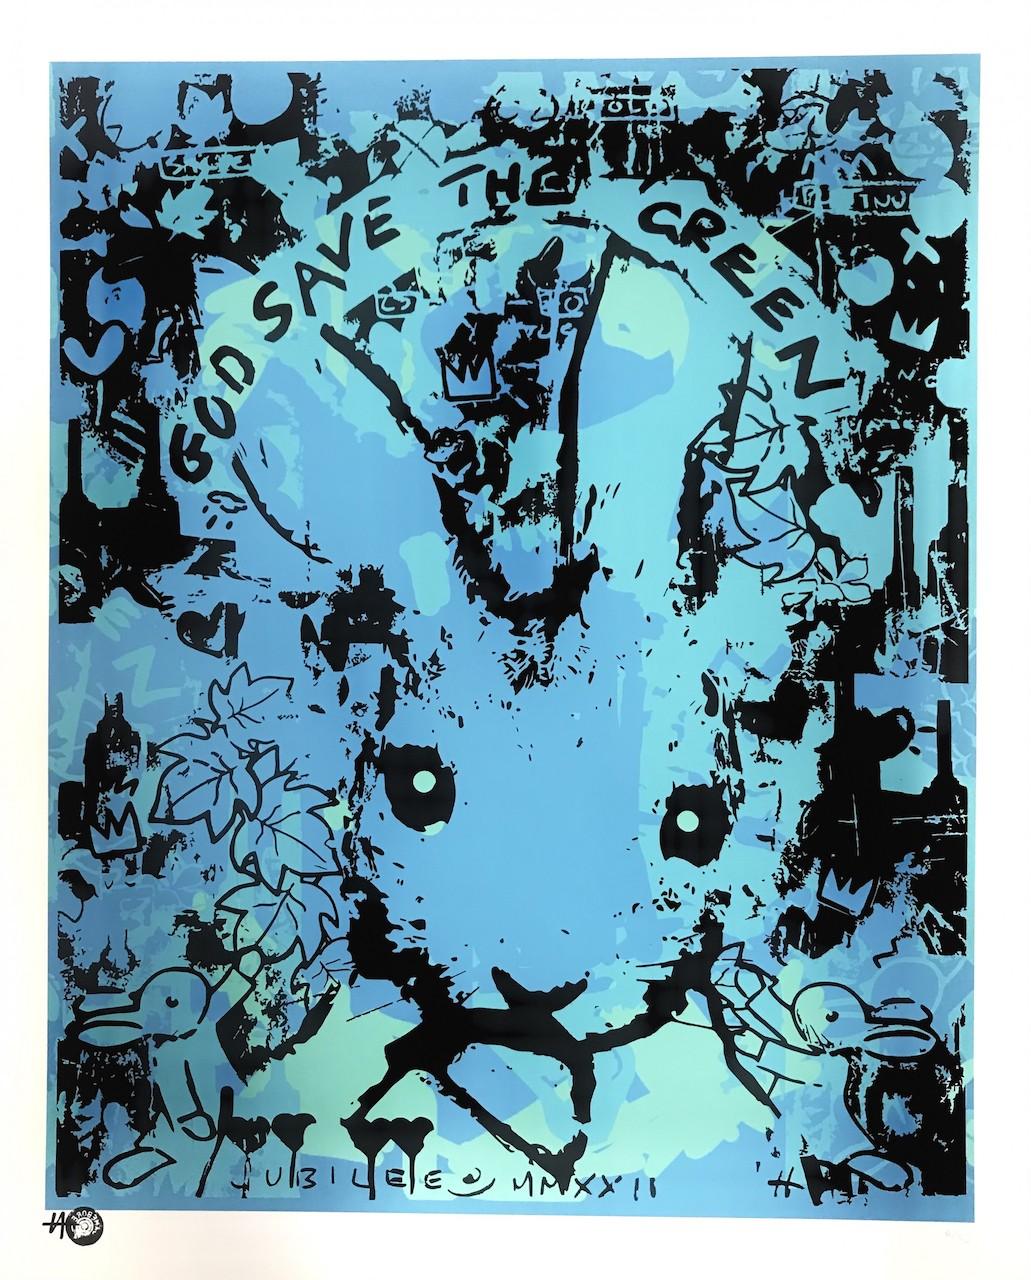 God Save the Green by Artist Harry Bunce is a limited edition print. An expressionistic piece, depicting a rabbit with the caption above 'God Save the Green'.

Harry Bunce artist with Wychwood Art. Born in 1967 and raised in a small Hampshire